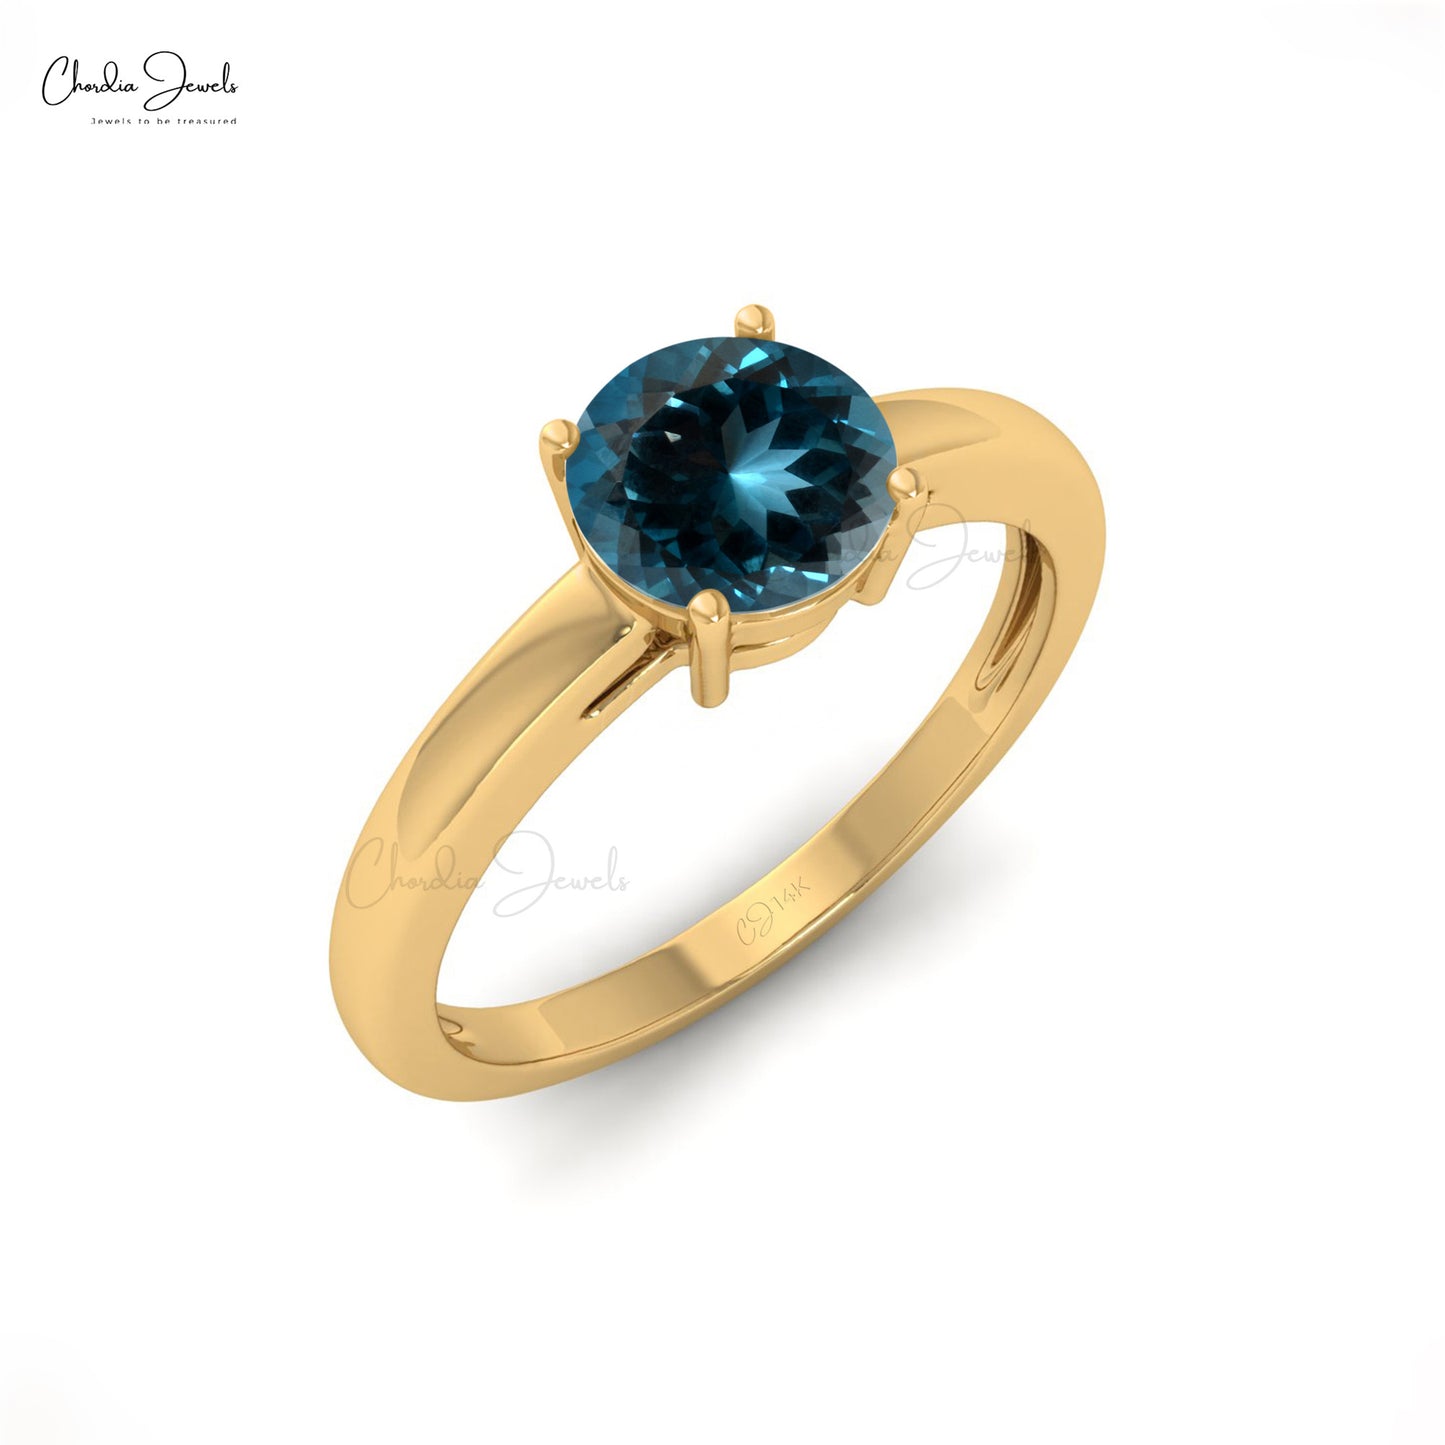 Load image into Gallery viewer, 14k Solid Gold Natural Gemstone Solitaire Ring For Valentine, 0.57 Carats London Blue Topaz December Birthstone Dainty Ring For Women
